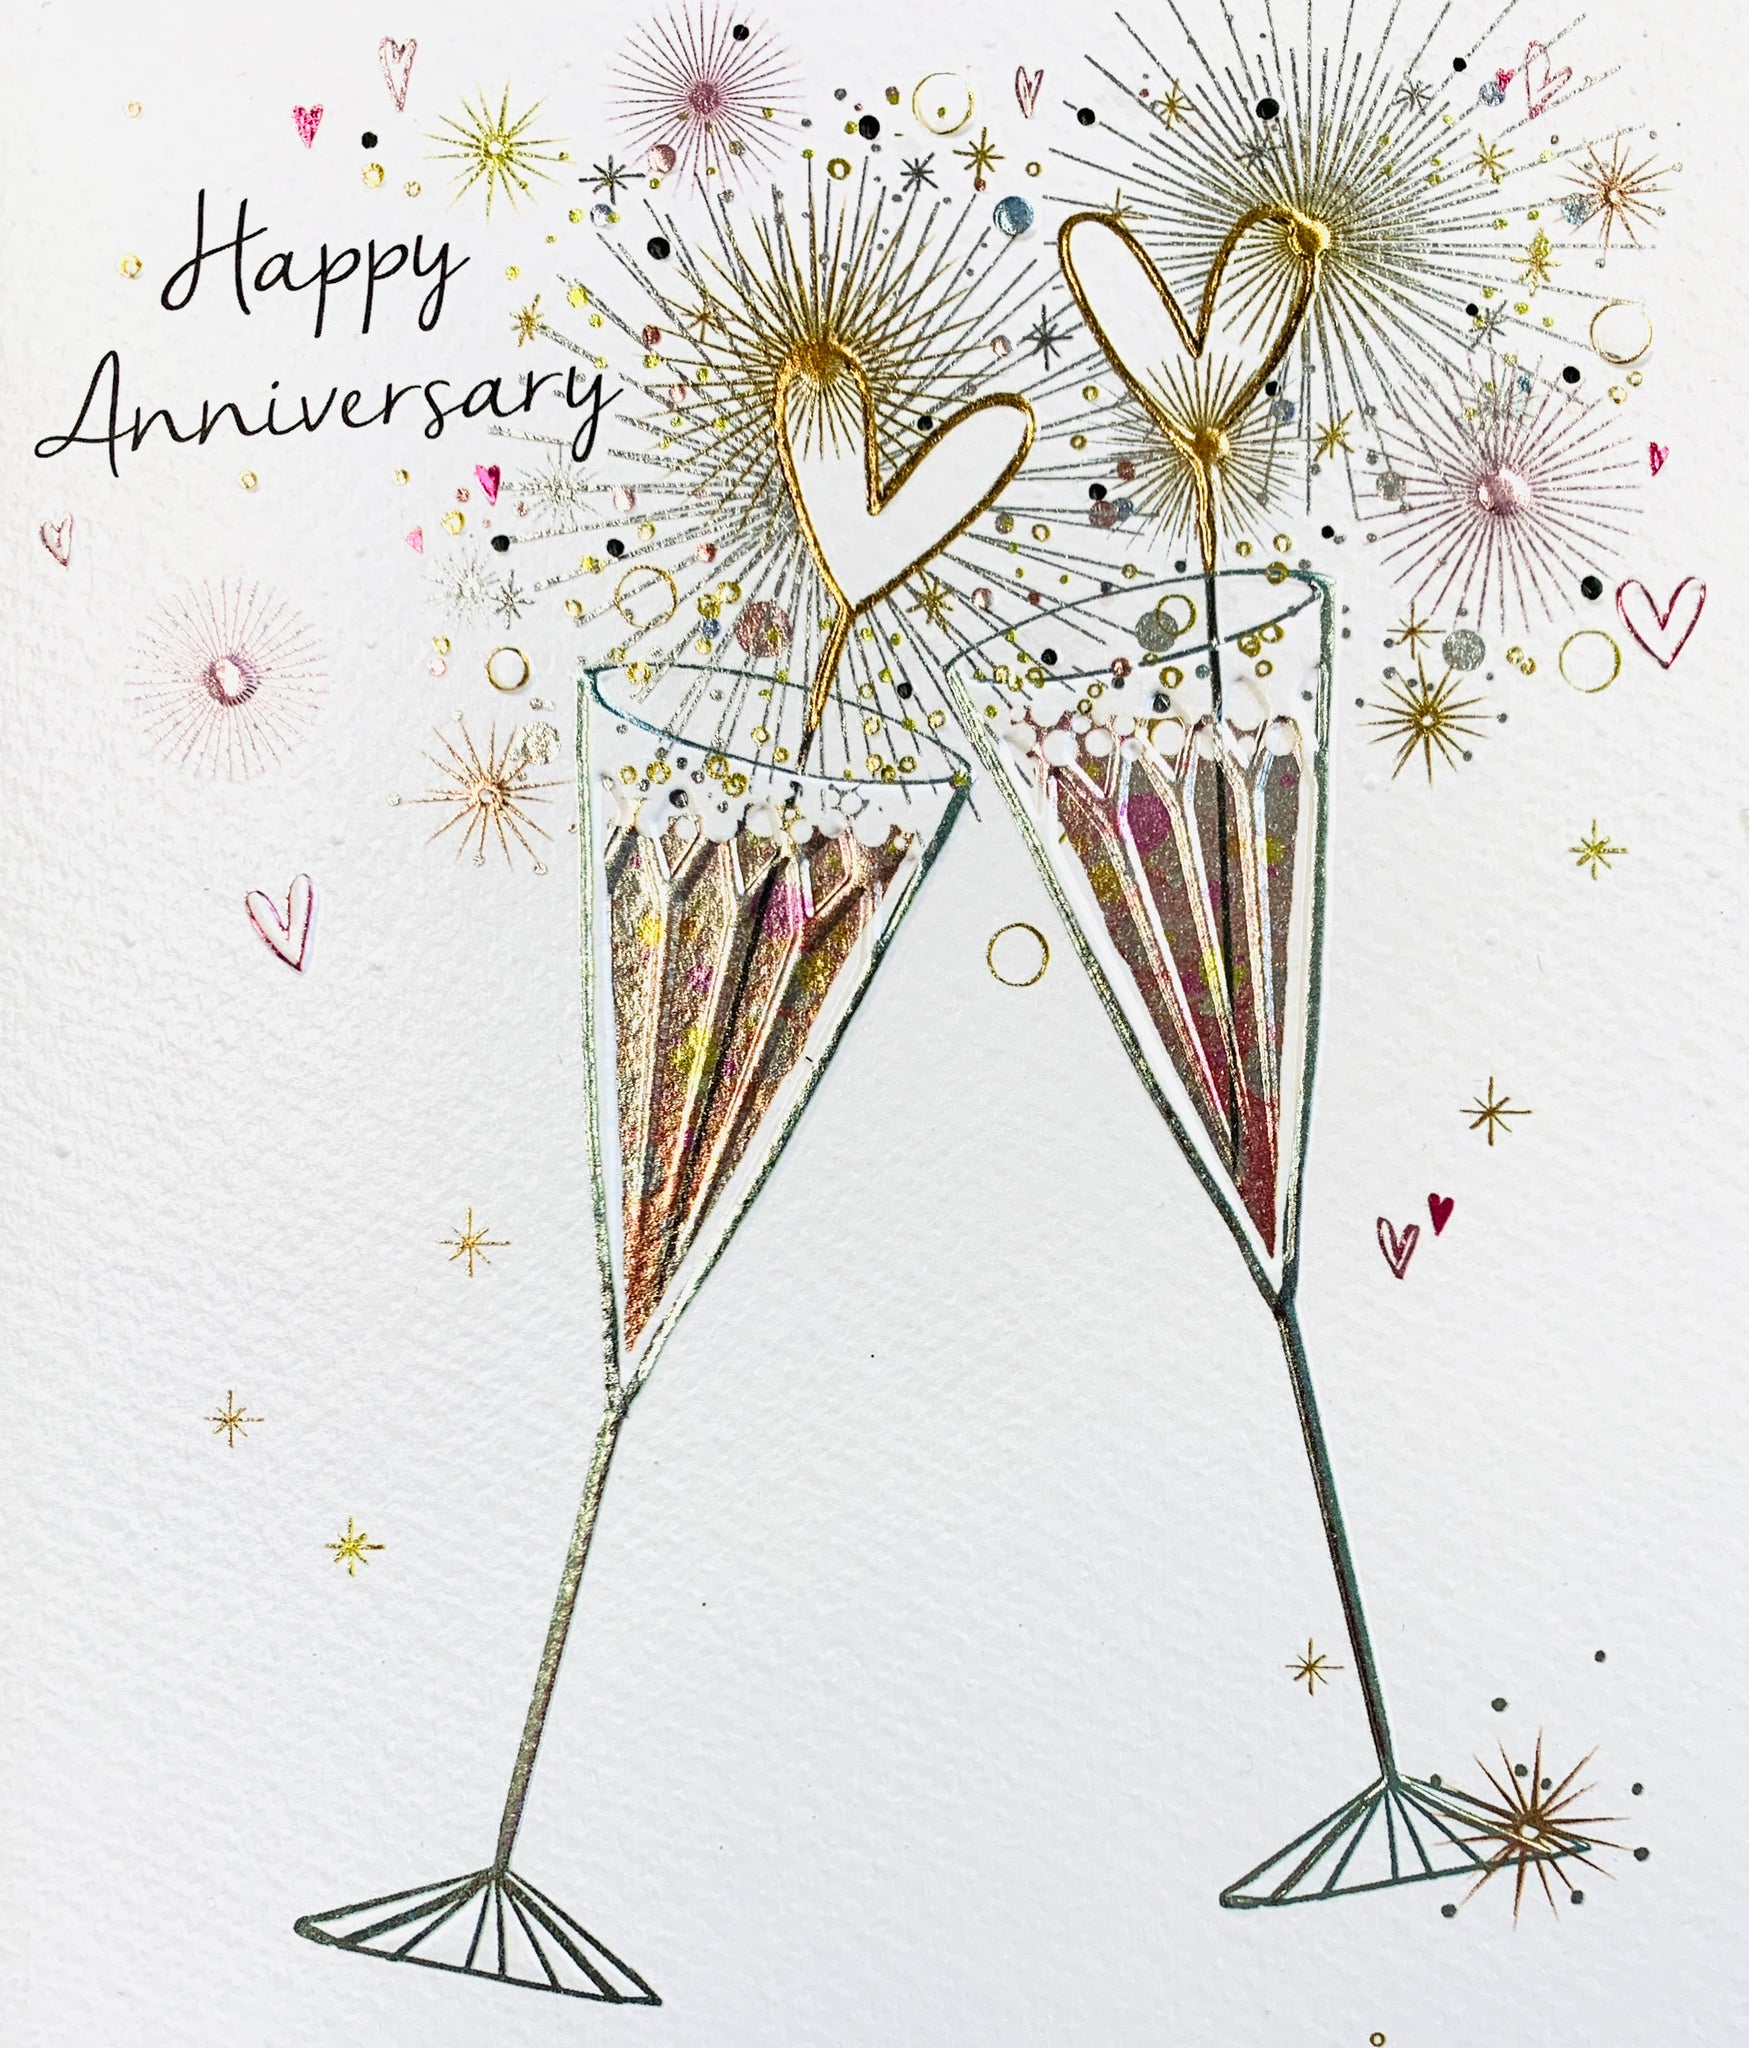 Your anniversary card - sparking anniversary drinks